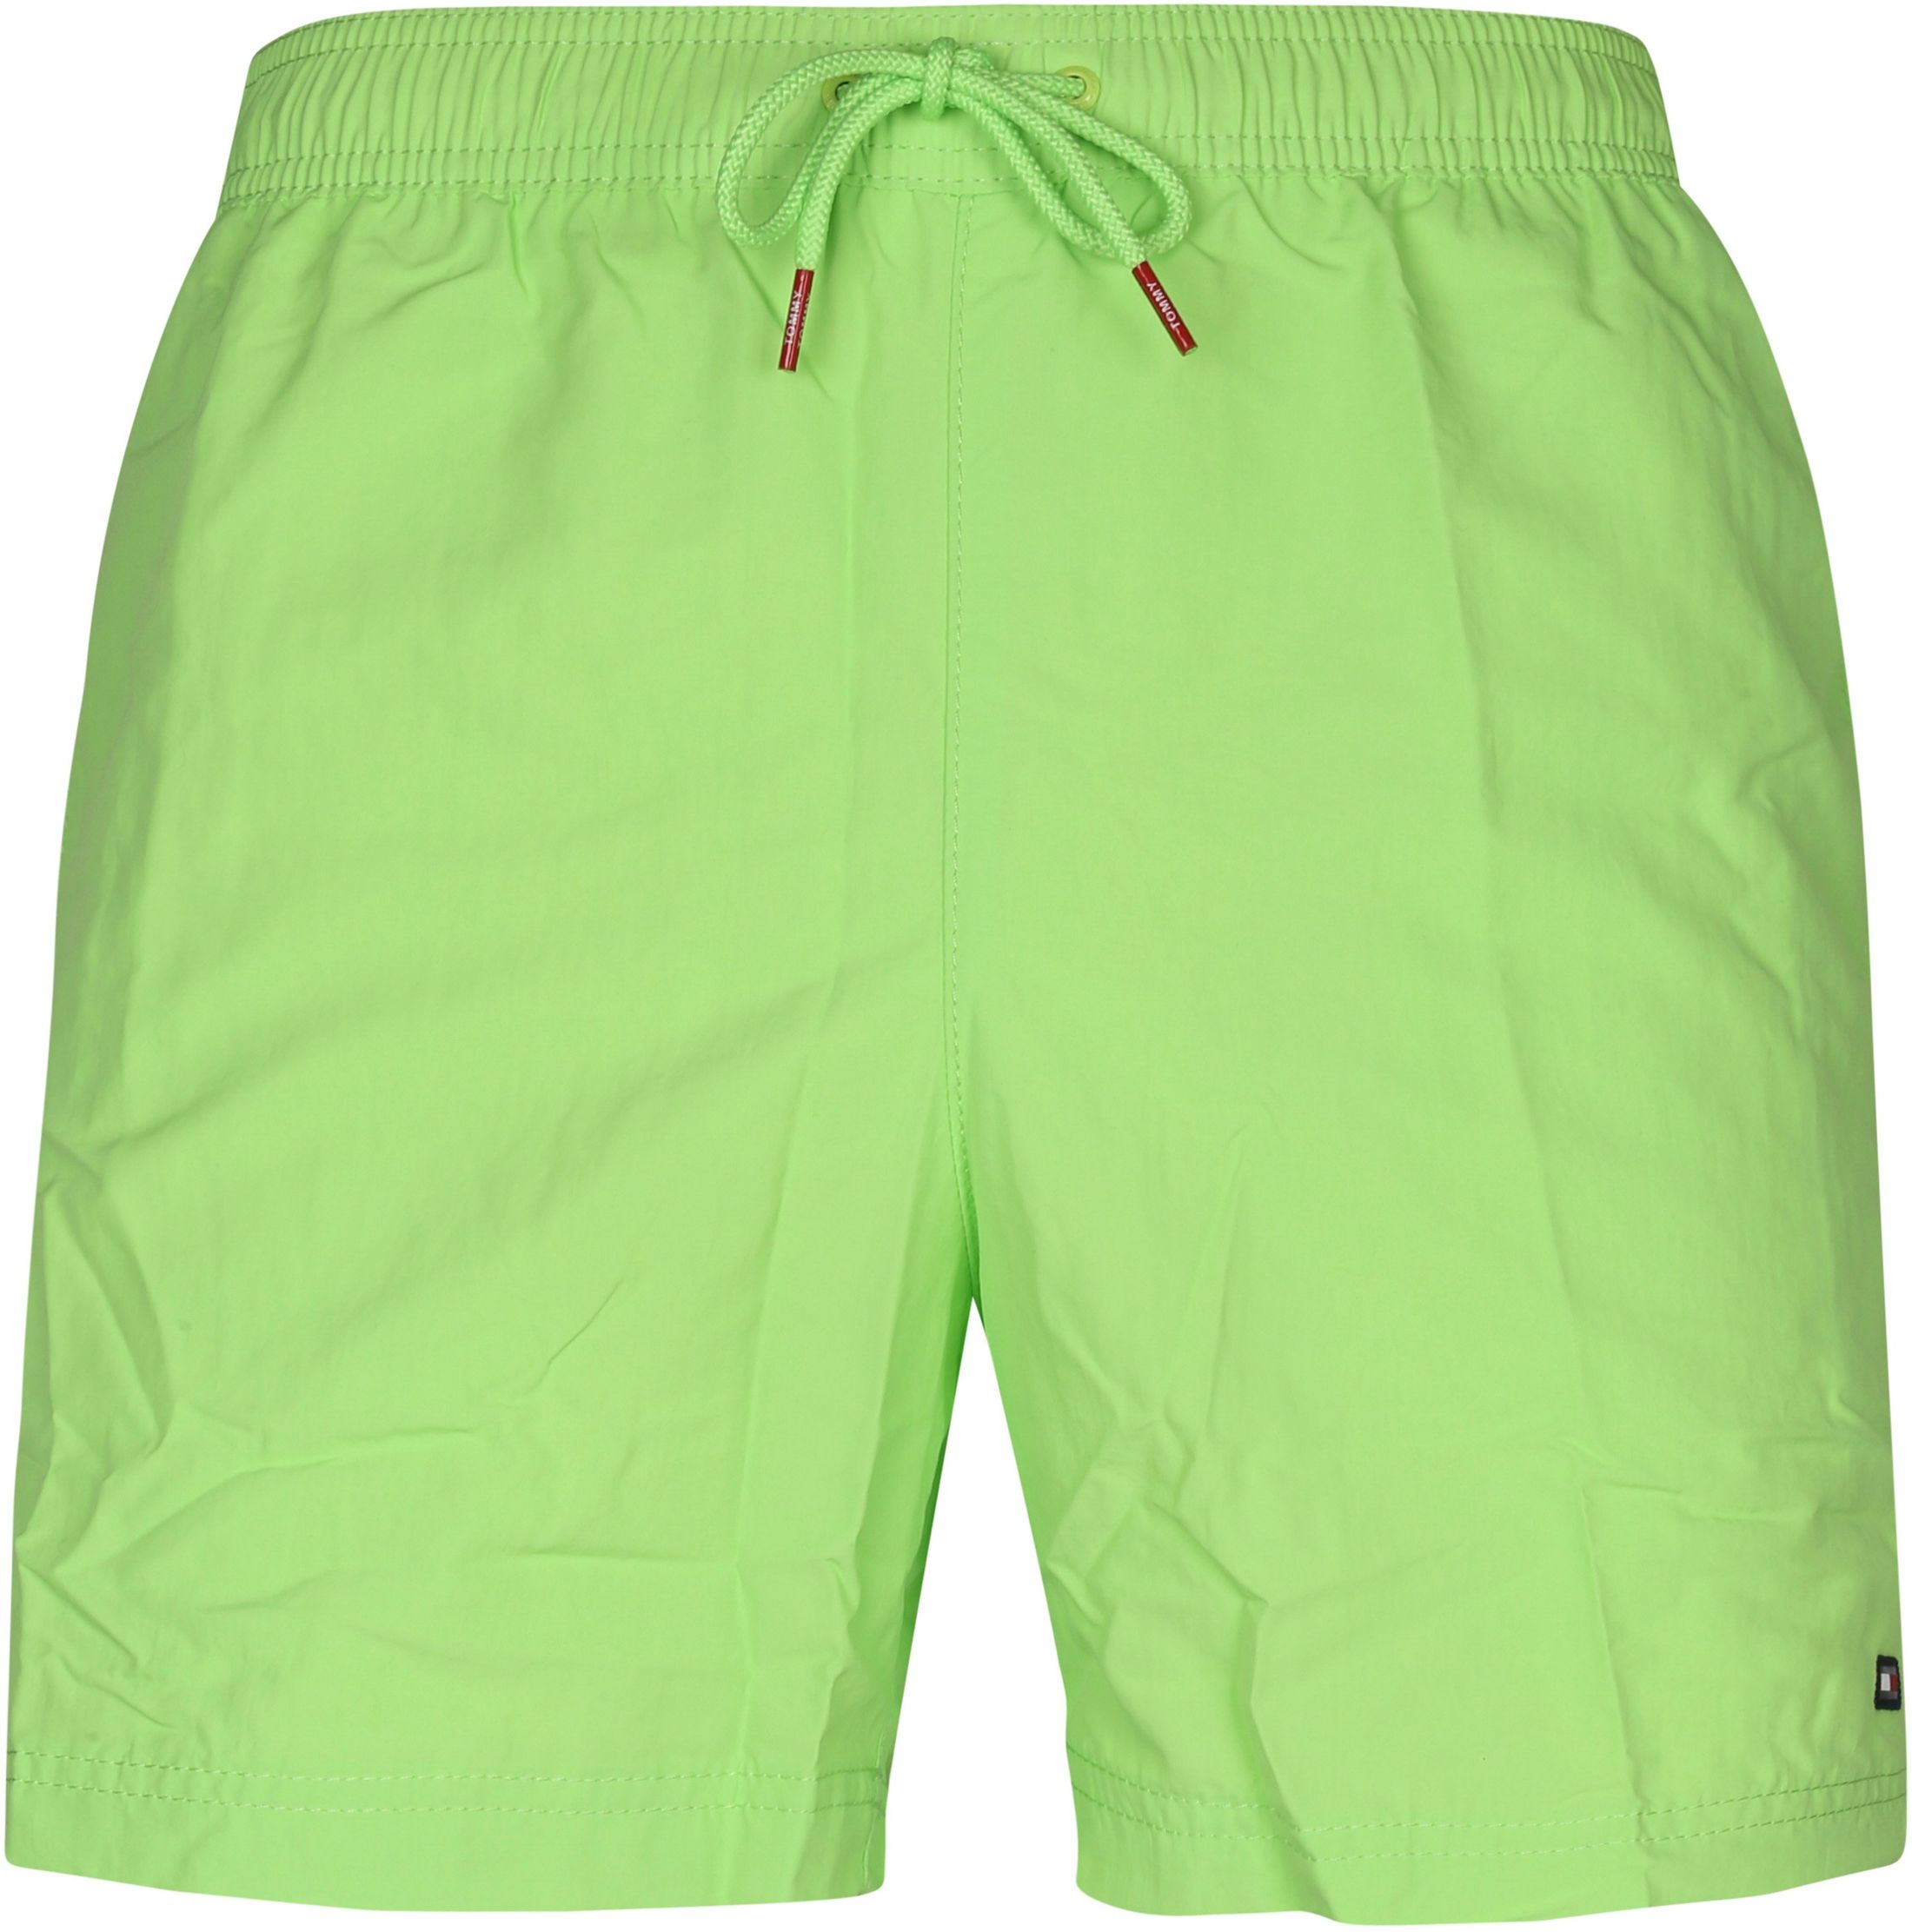 Tommy Hilfiger Swimshorts Neon Green size M